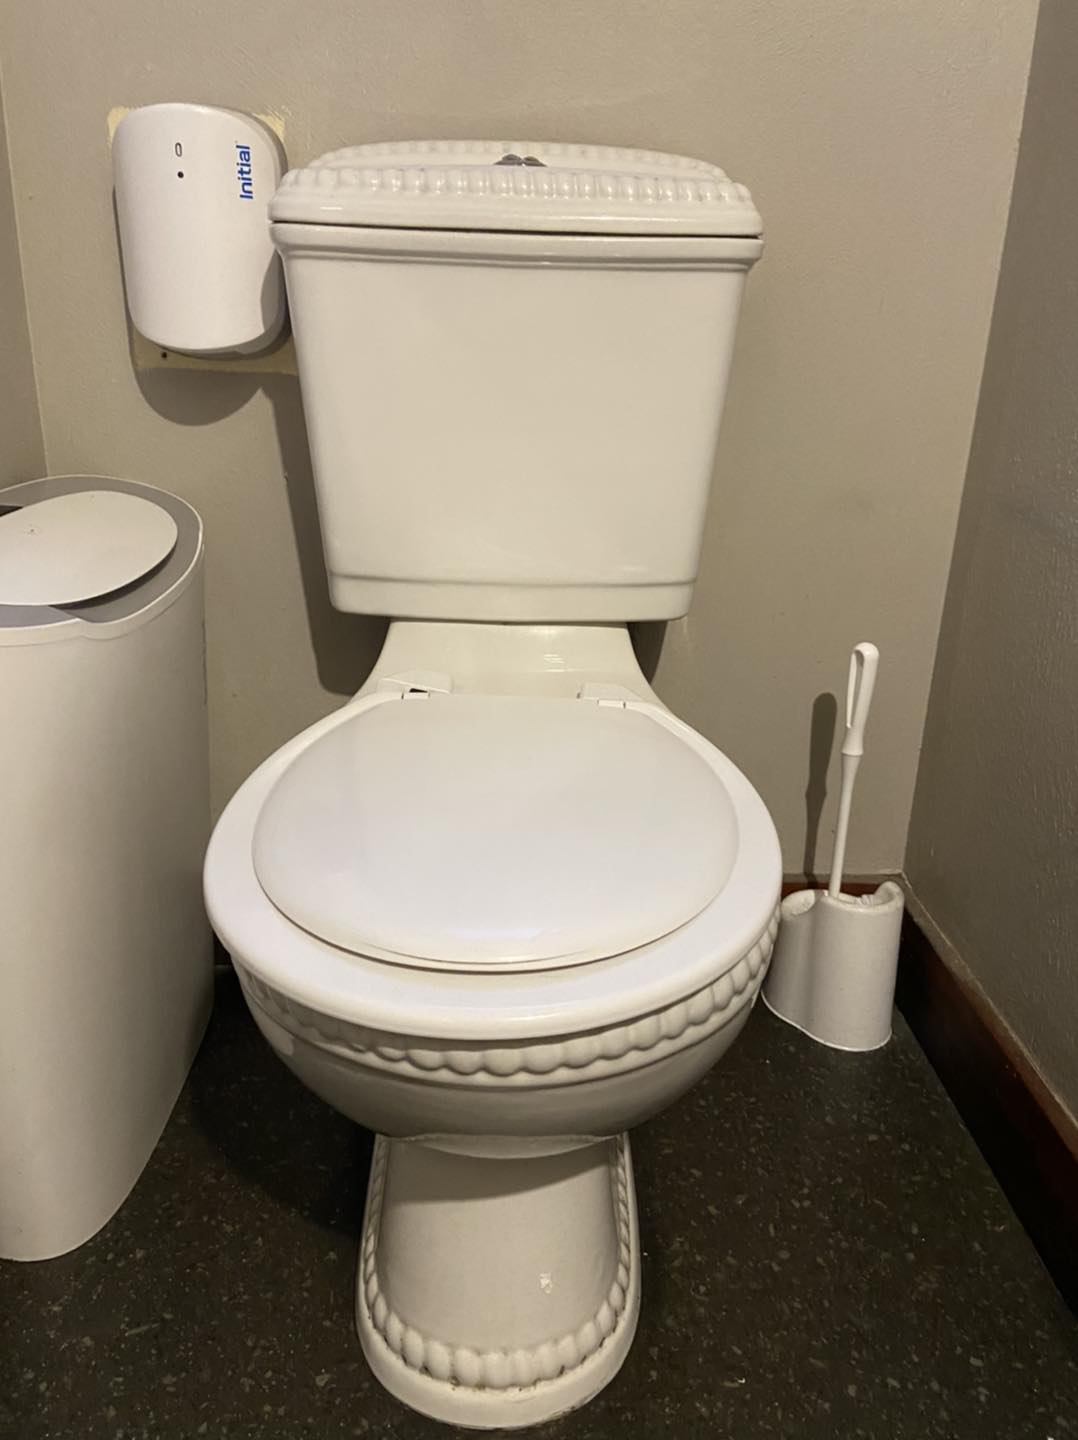 replace my toilet